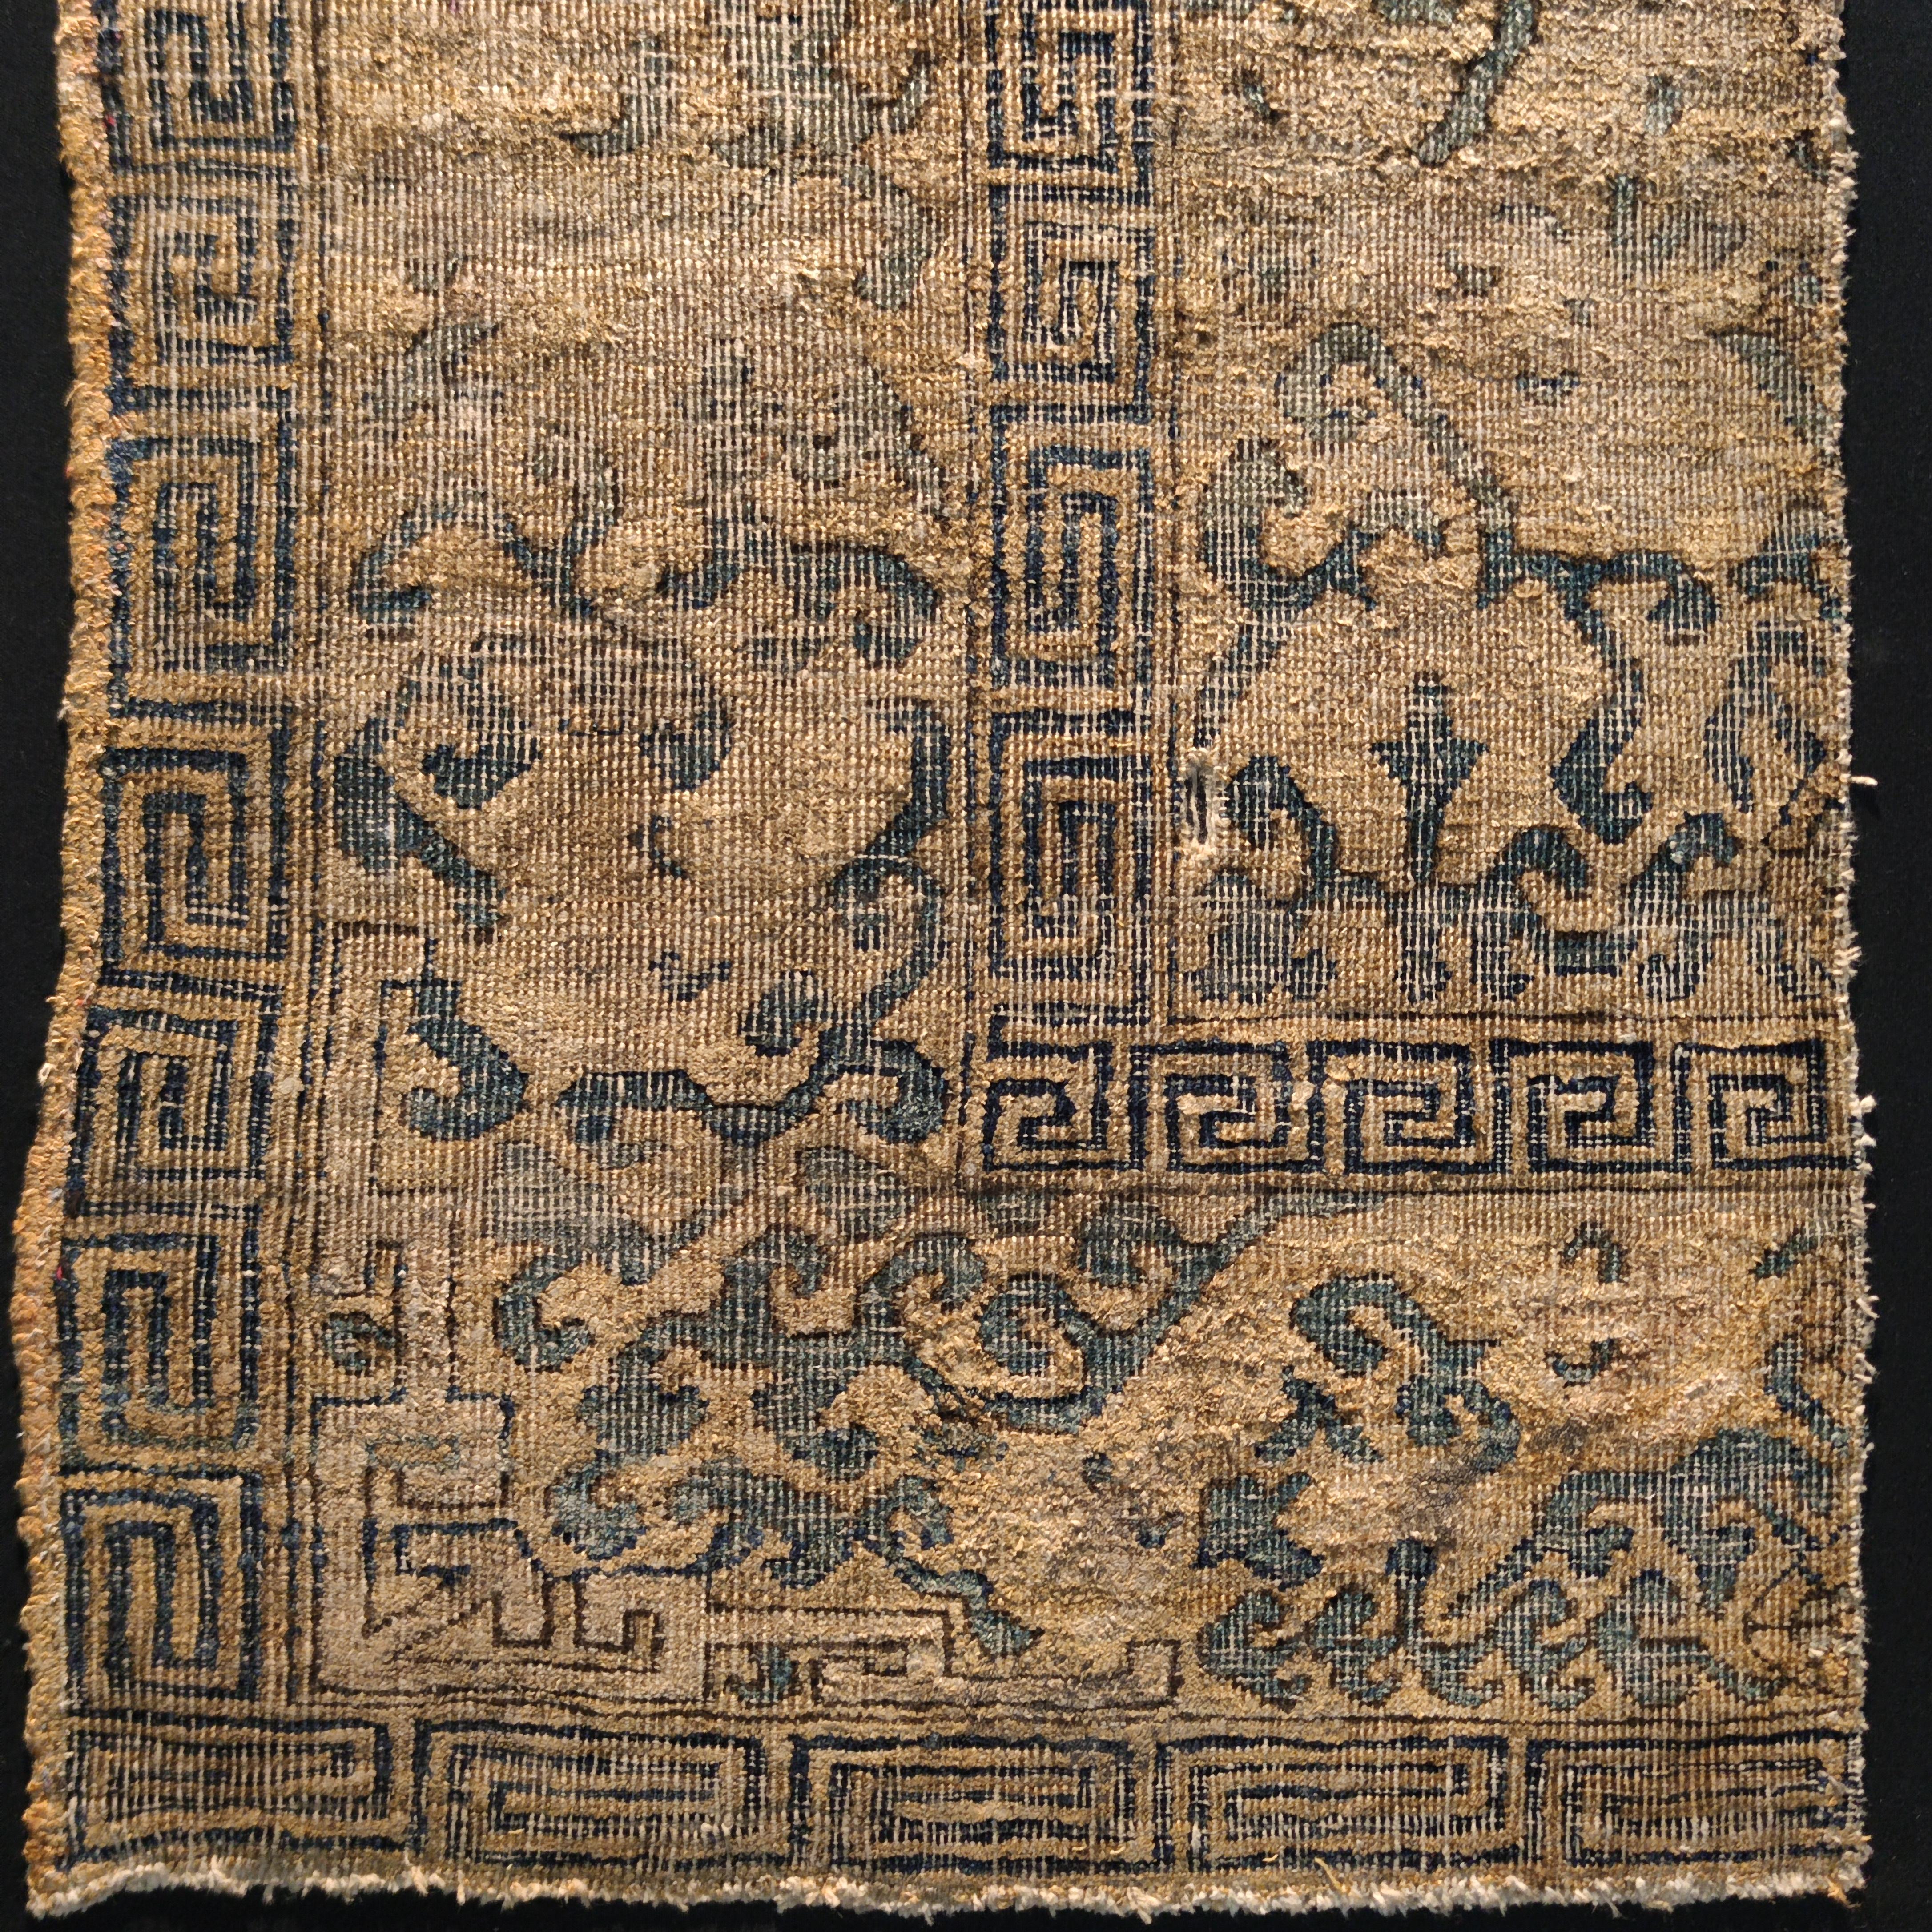 This very rare fragment belongs to a specific group of twelve silk Kashgar throne covers, all with a similar design and palette and distinguished by an extremely fine knotting. Among the group one is in the Victoria & Albert Museum in London and two